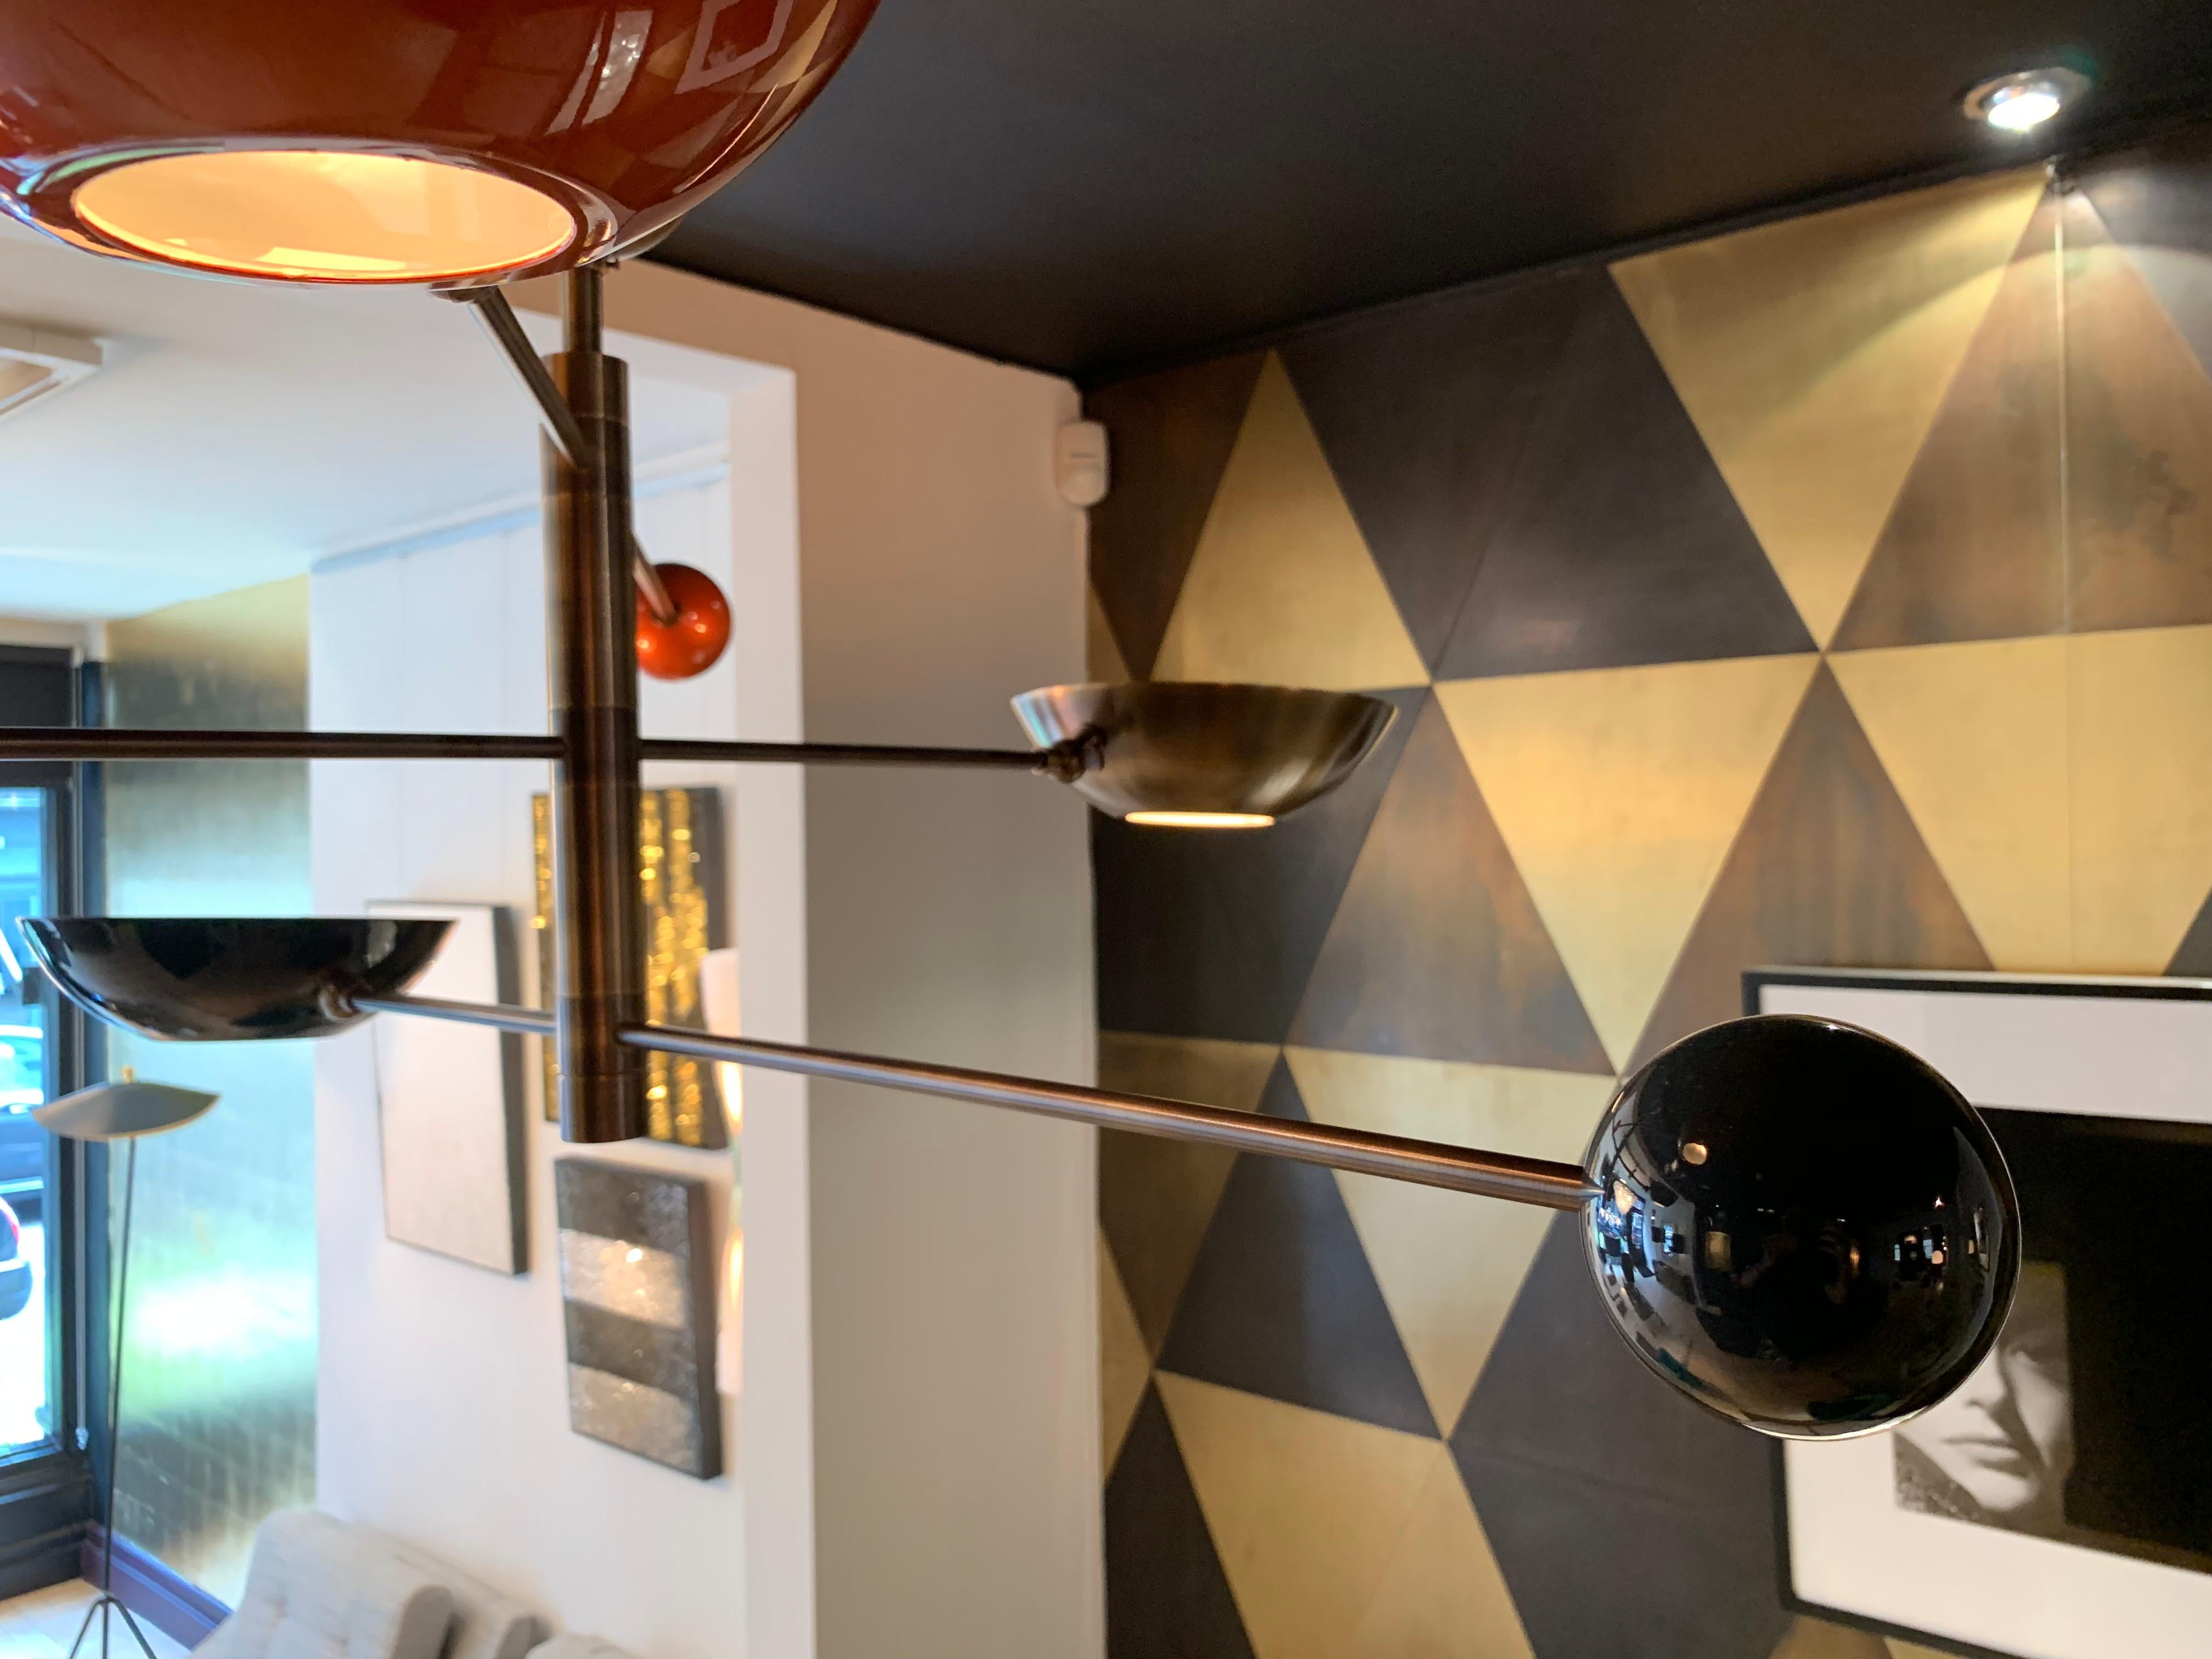 A customised version of our popular Contrapesi pendant, this demure version has grey and orange cups and counterweights on a bronze patinated brass frame.

Set to a total drop of 40 cm, this pendant is ideal for rooms with a lower ceiling.

This